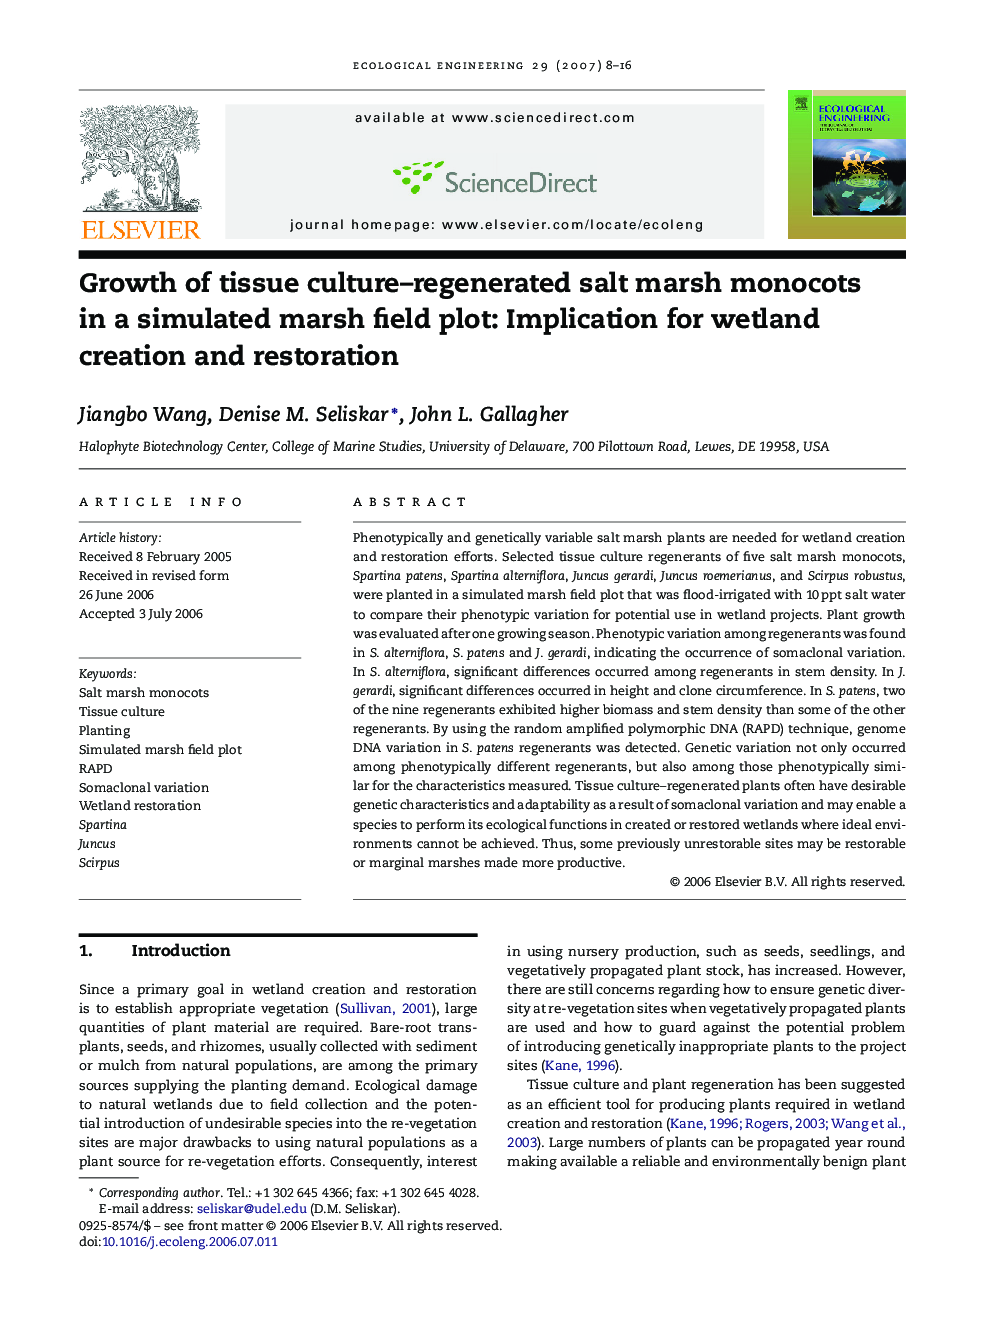 Growth of tissue culture-regenerated salt marsh monocots in a simulated marsh field plot: Implication for wetland creation and restoration